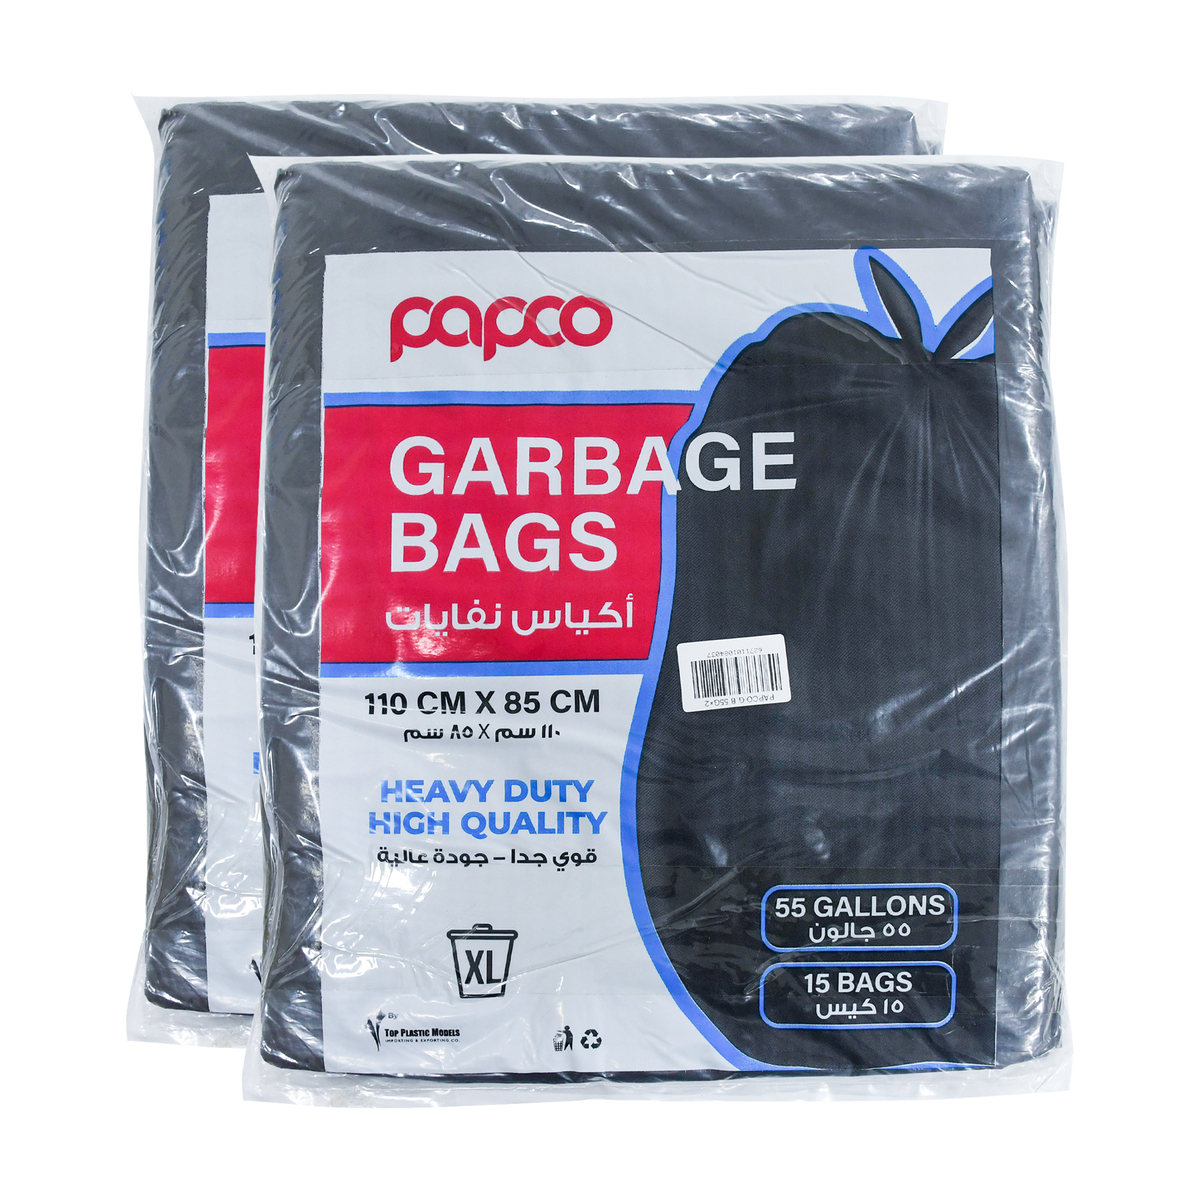 Papco Garbage Bags 110 x 85cm 55 Gallons Value Pack 2 x 15 pcs